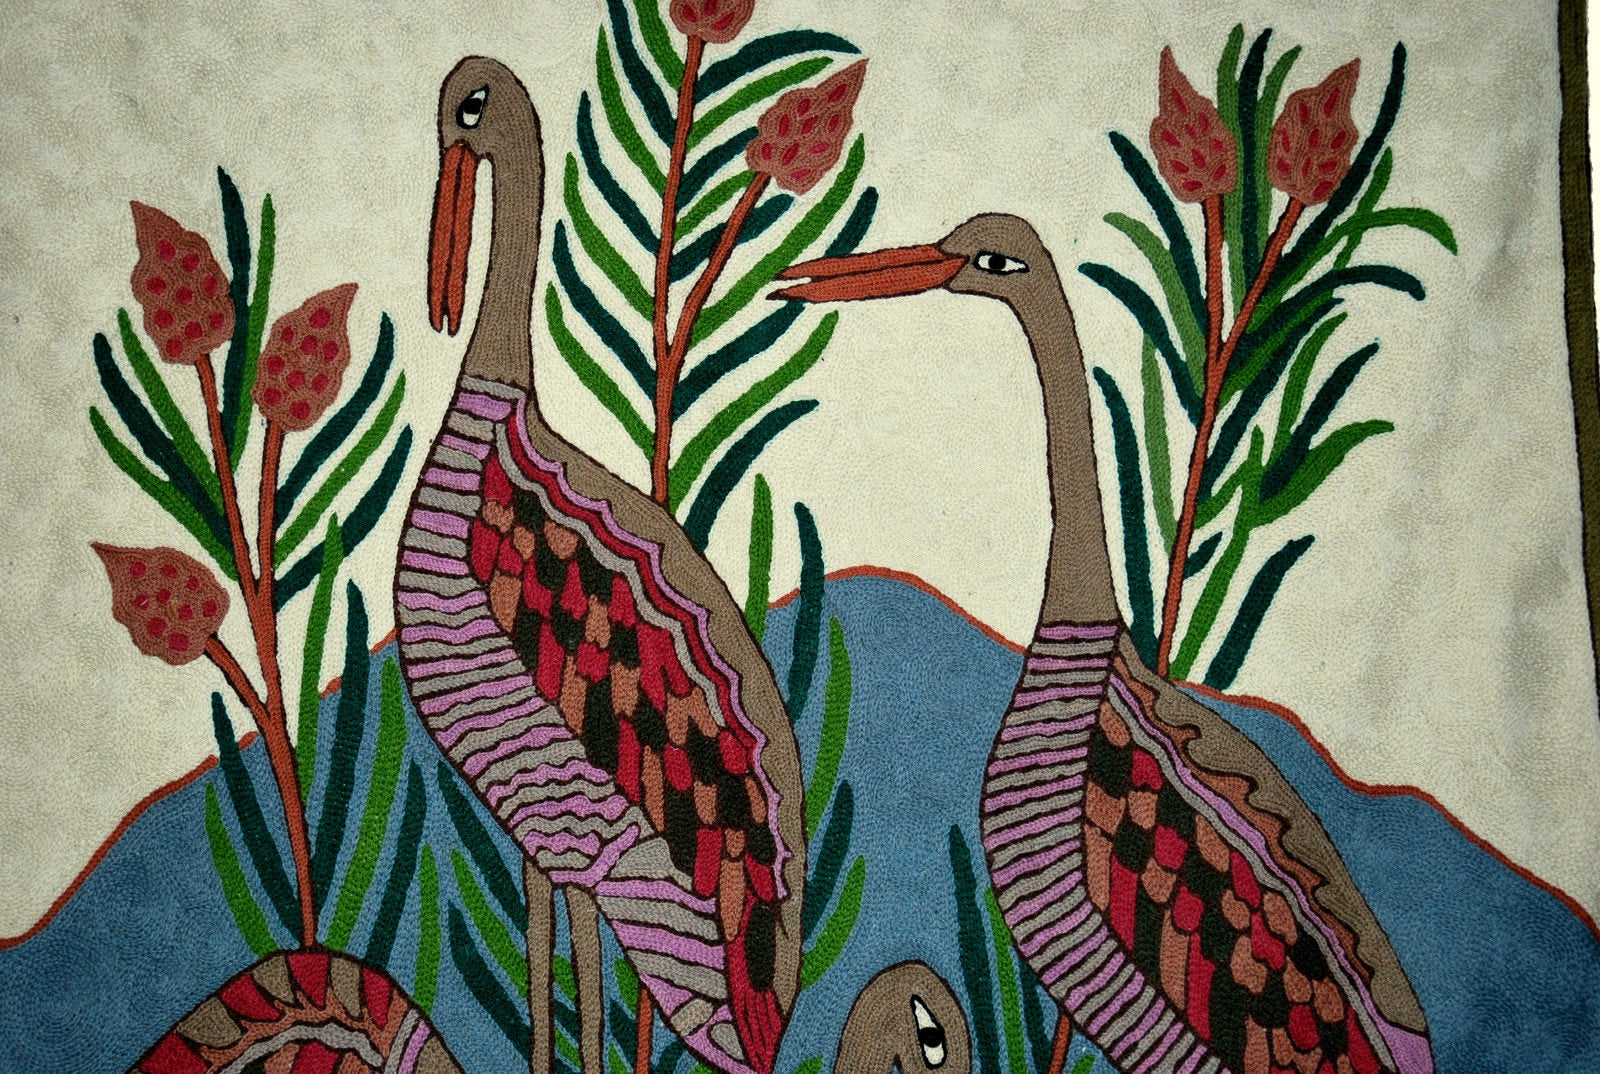 ChainStitch Tapestry Area Rug "Birds", Multicolor Wool Embroidery 3x5 feet #CWR15119